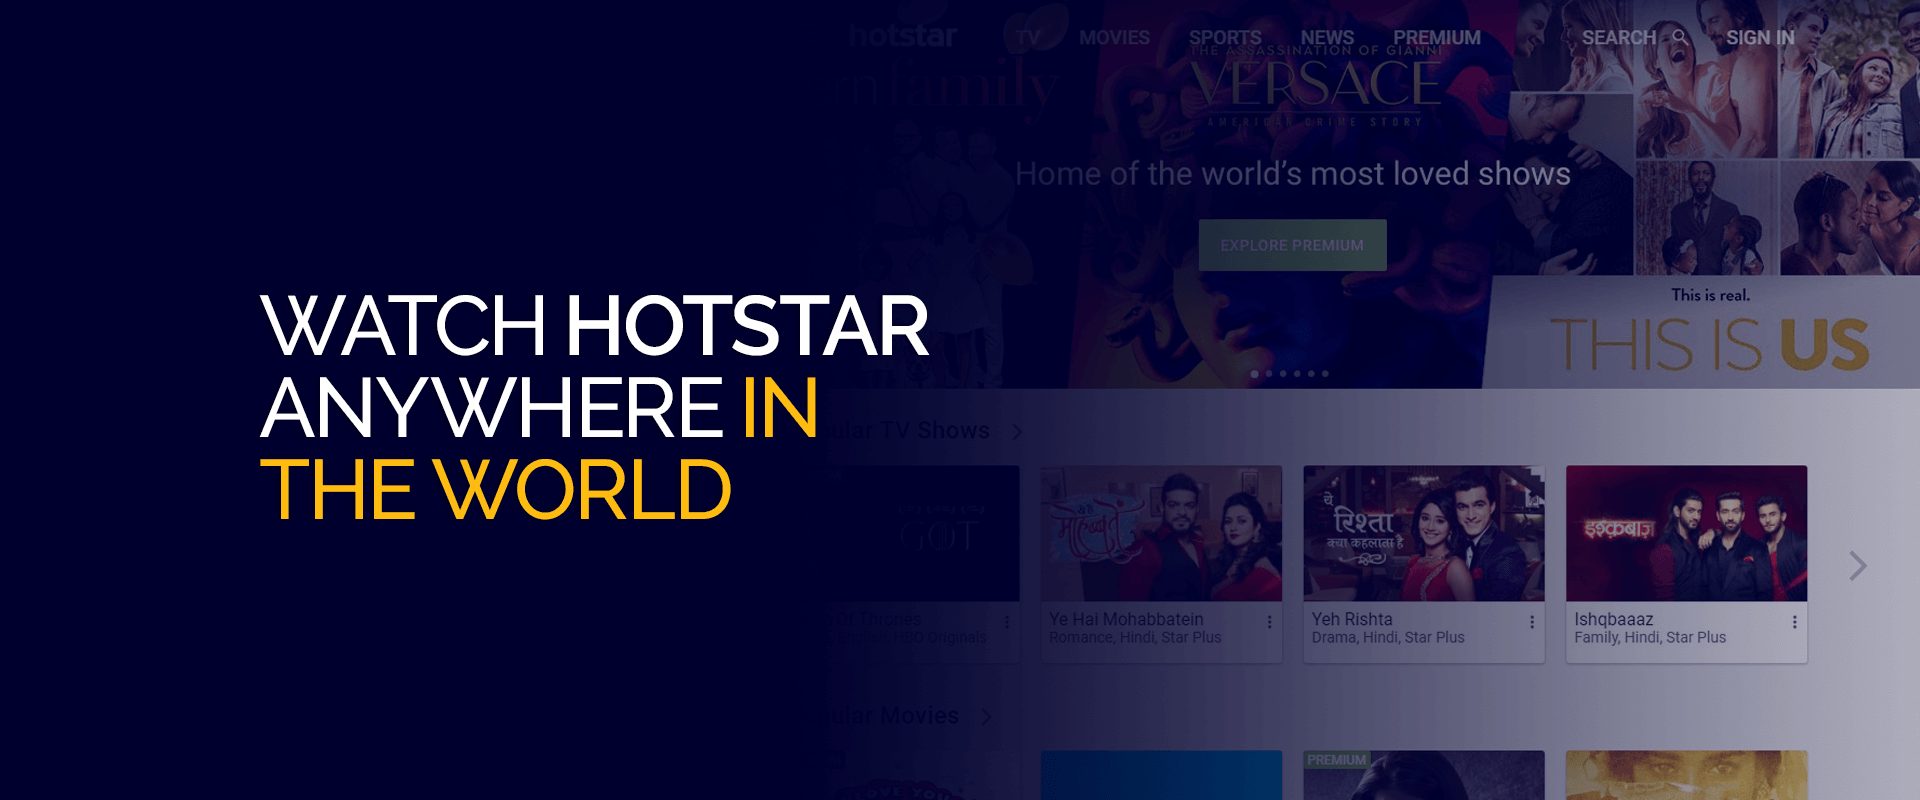 How to Watch HotStar Live TV Anywhere in The World with VPN